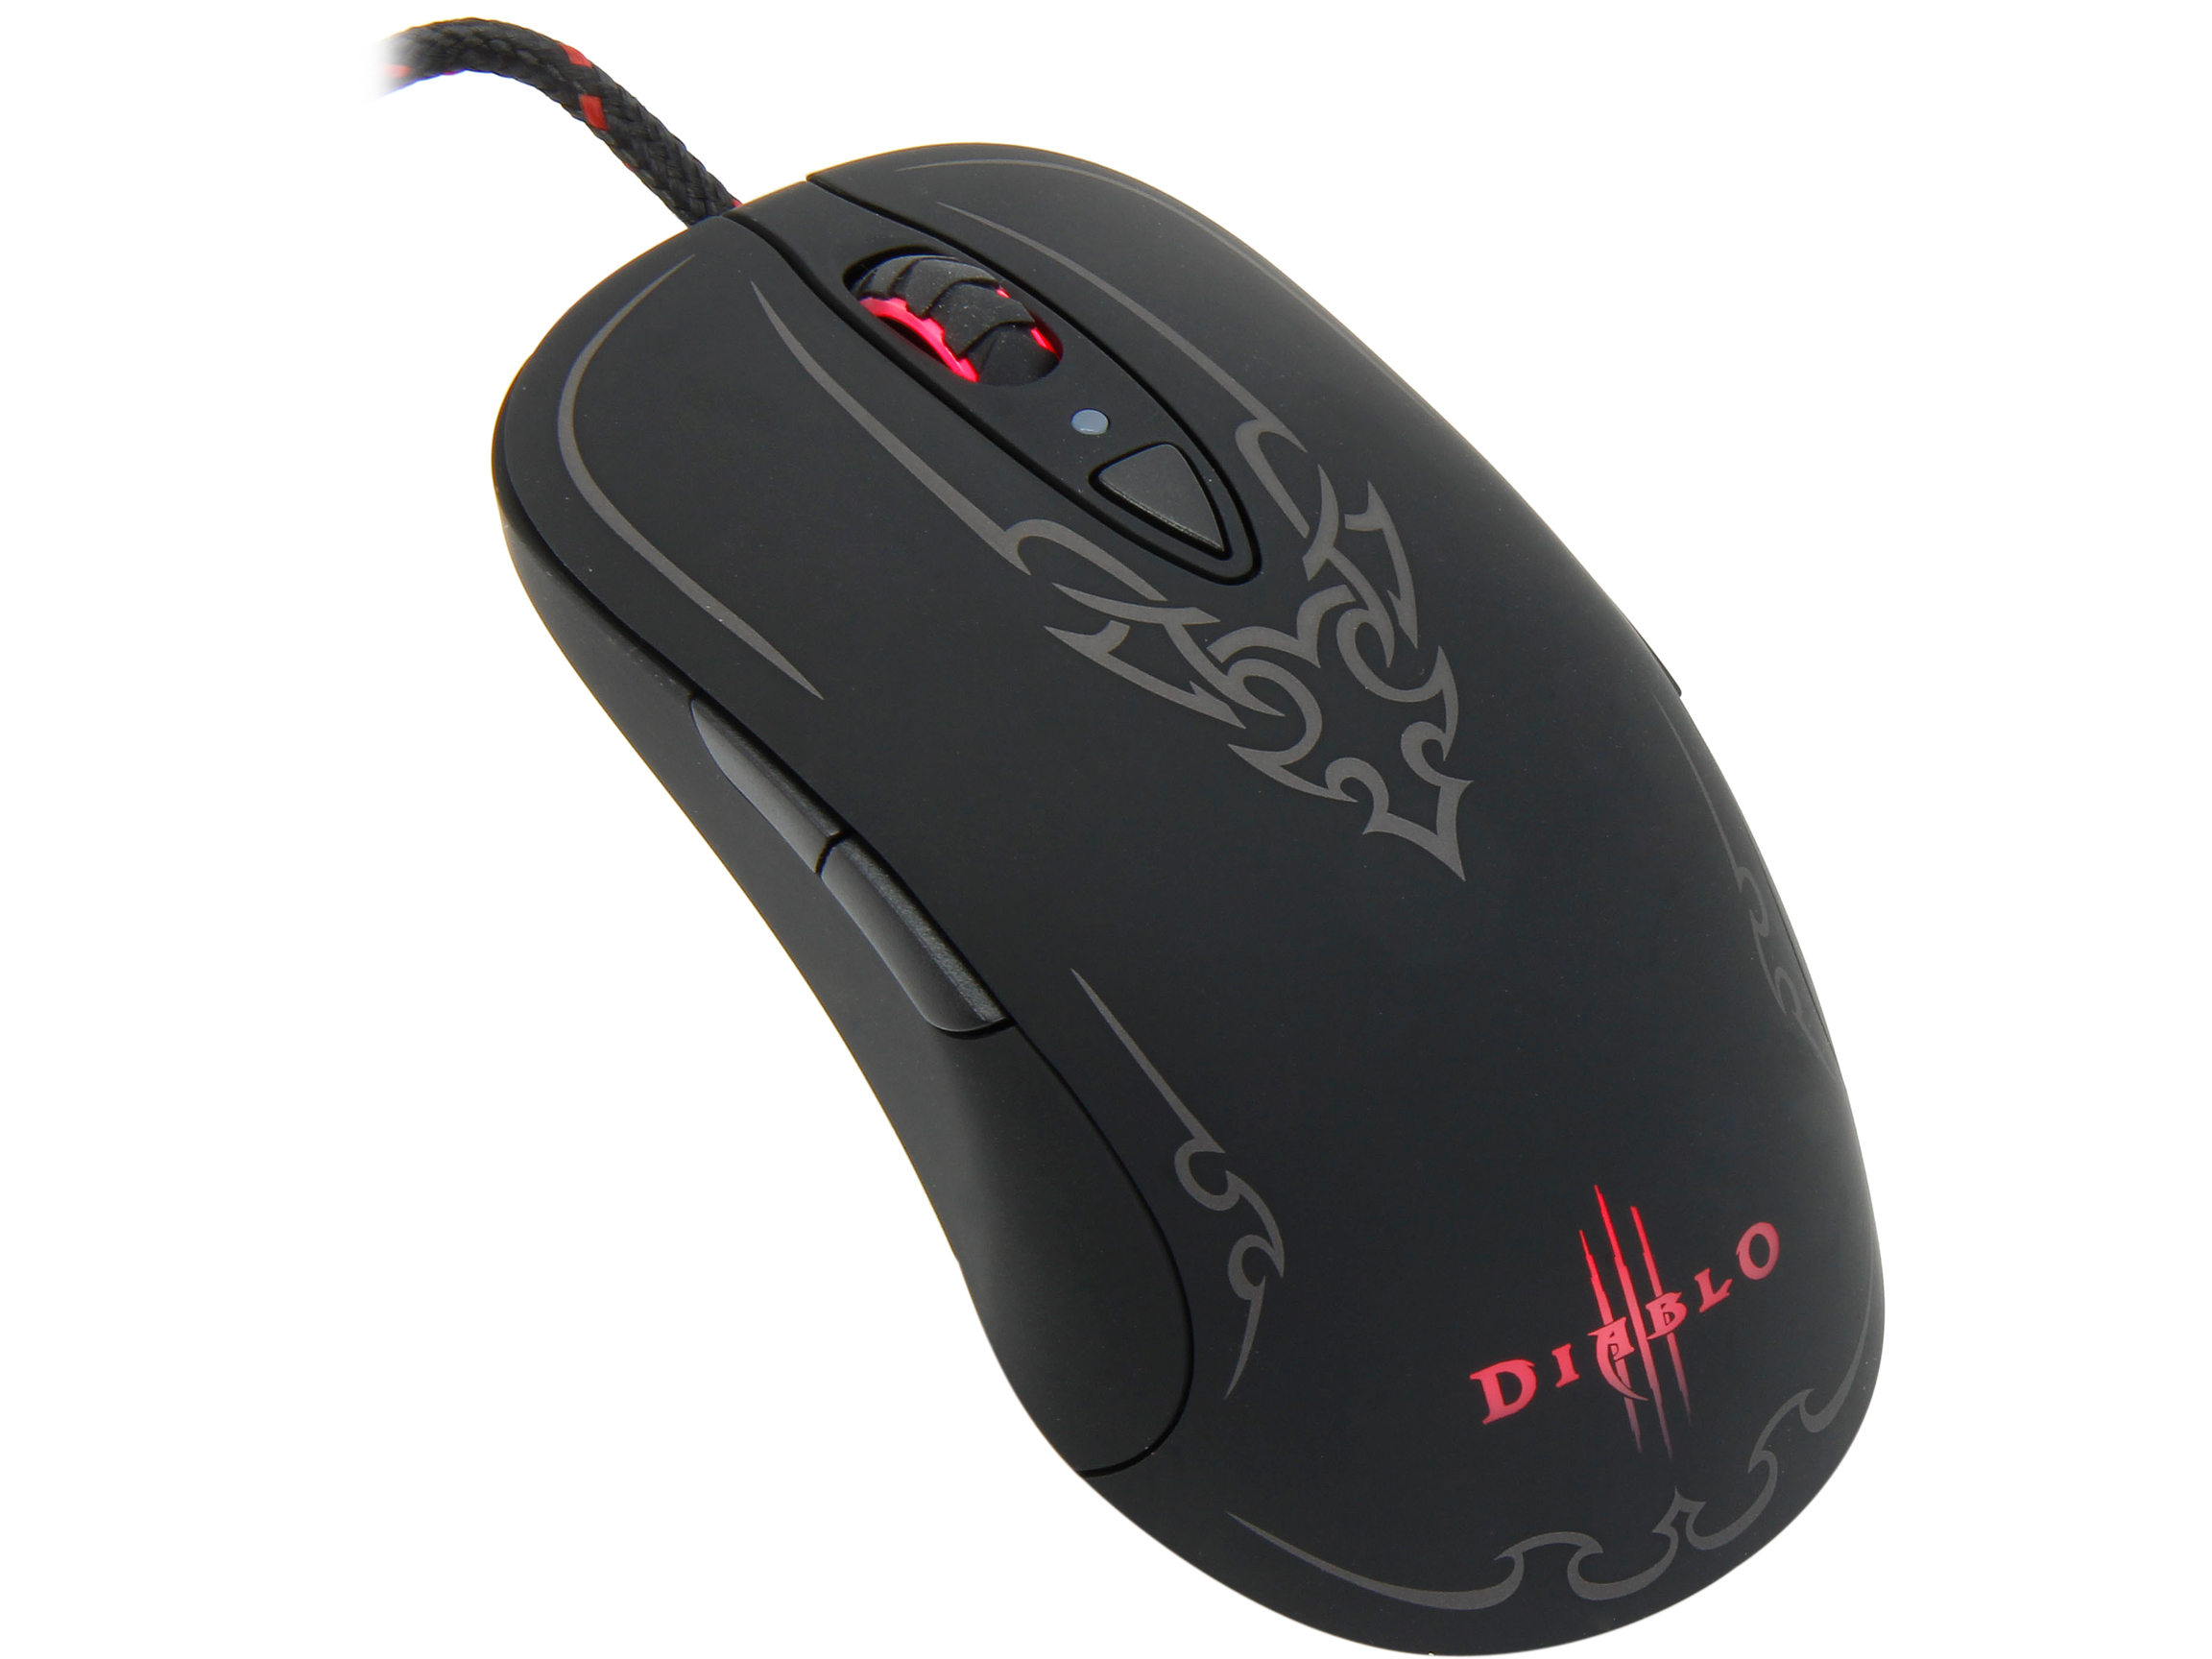 Refurbished SteelSeries Diablo III 62151 Black 8 Buttons 1 x Wheel USB Wired Laser 5700 dpi Gaming Mouse